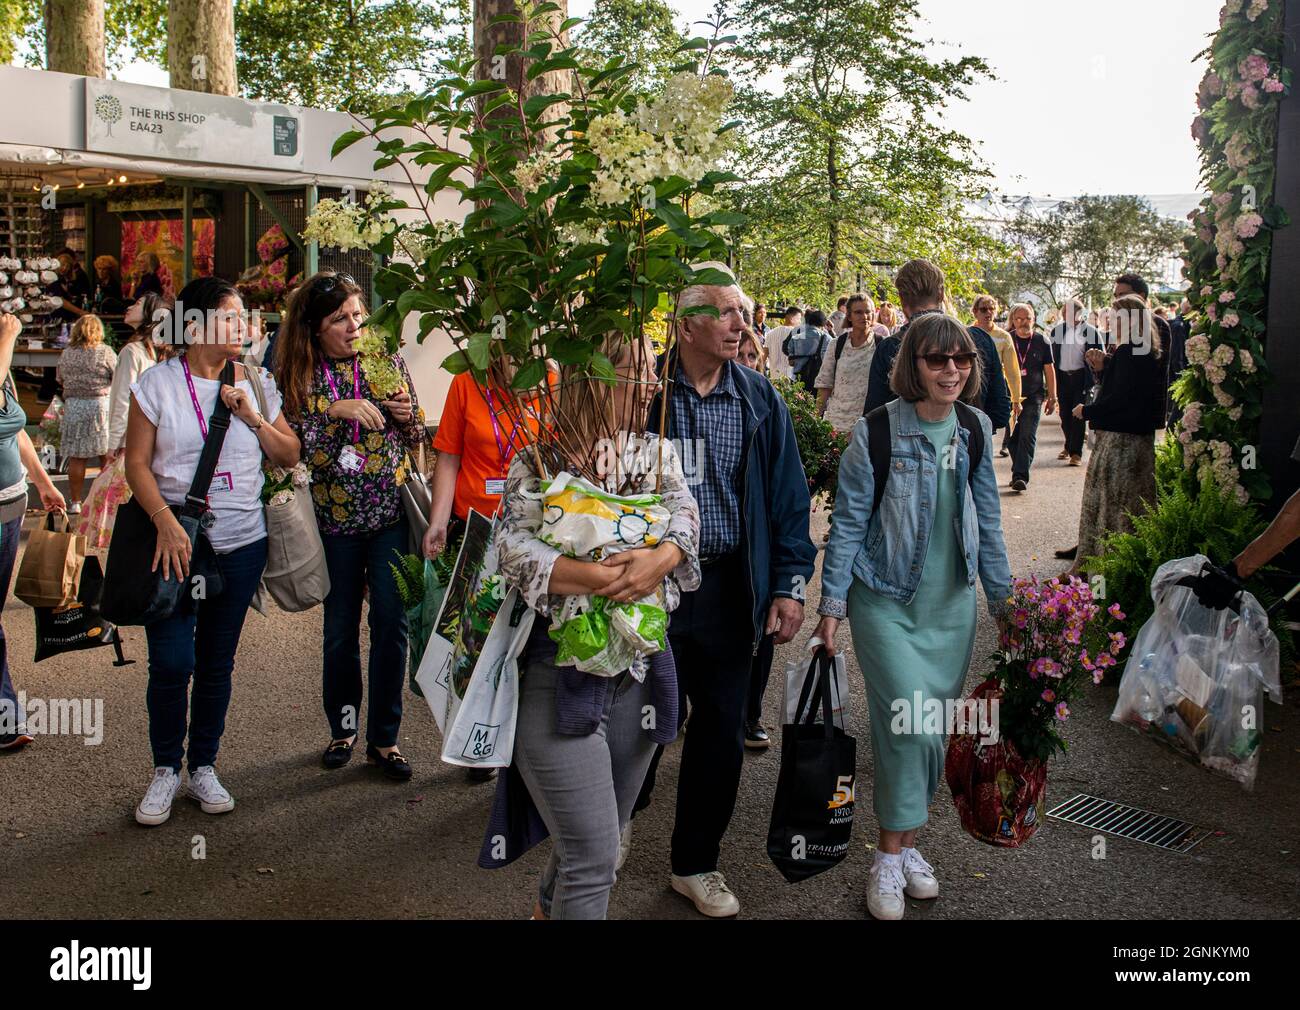 London, UK. 26th Sep, 2021. The last day at the RHS Chelsea Flower Show in glorious sunshine with visitors looking for bargains as exhibitors offer discounts before the end of the show. Credit: ernesto rogata/Alamy Live News Stock Photo